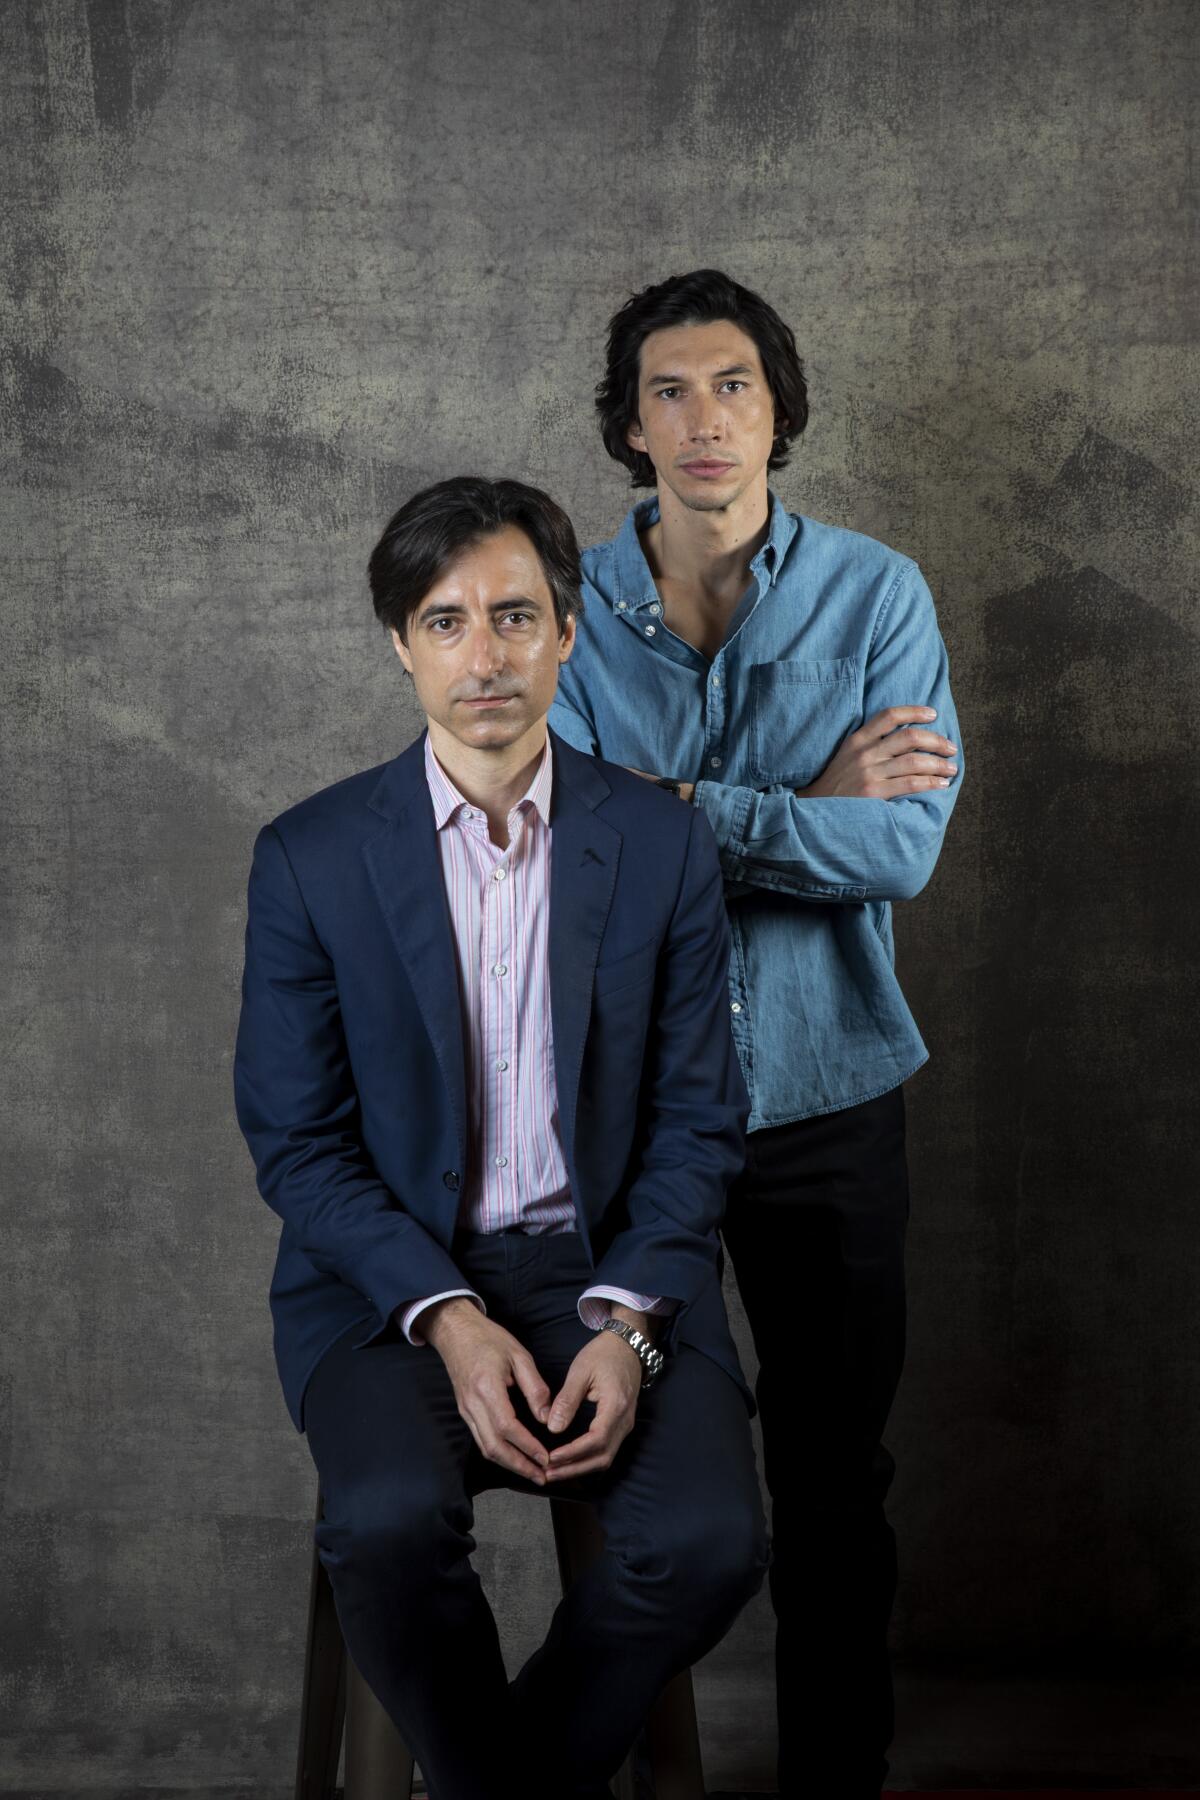 Director Noah Baumbach, left, and actor Adam Driver, from the film "Marriage Story," photographed at the Toronto International Film Festival